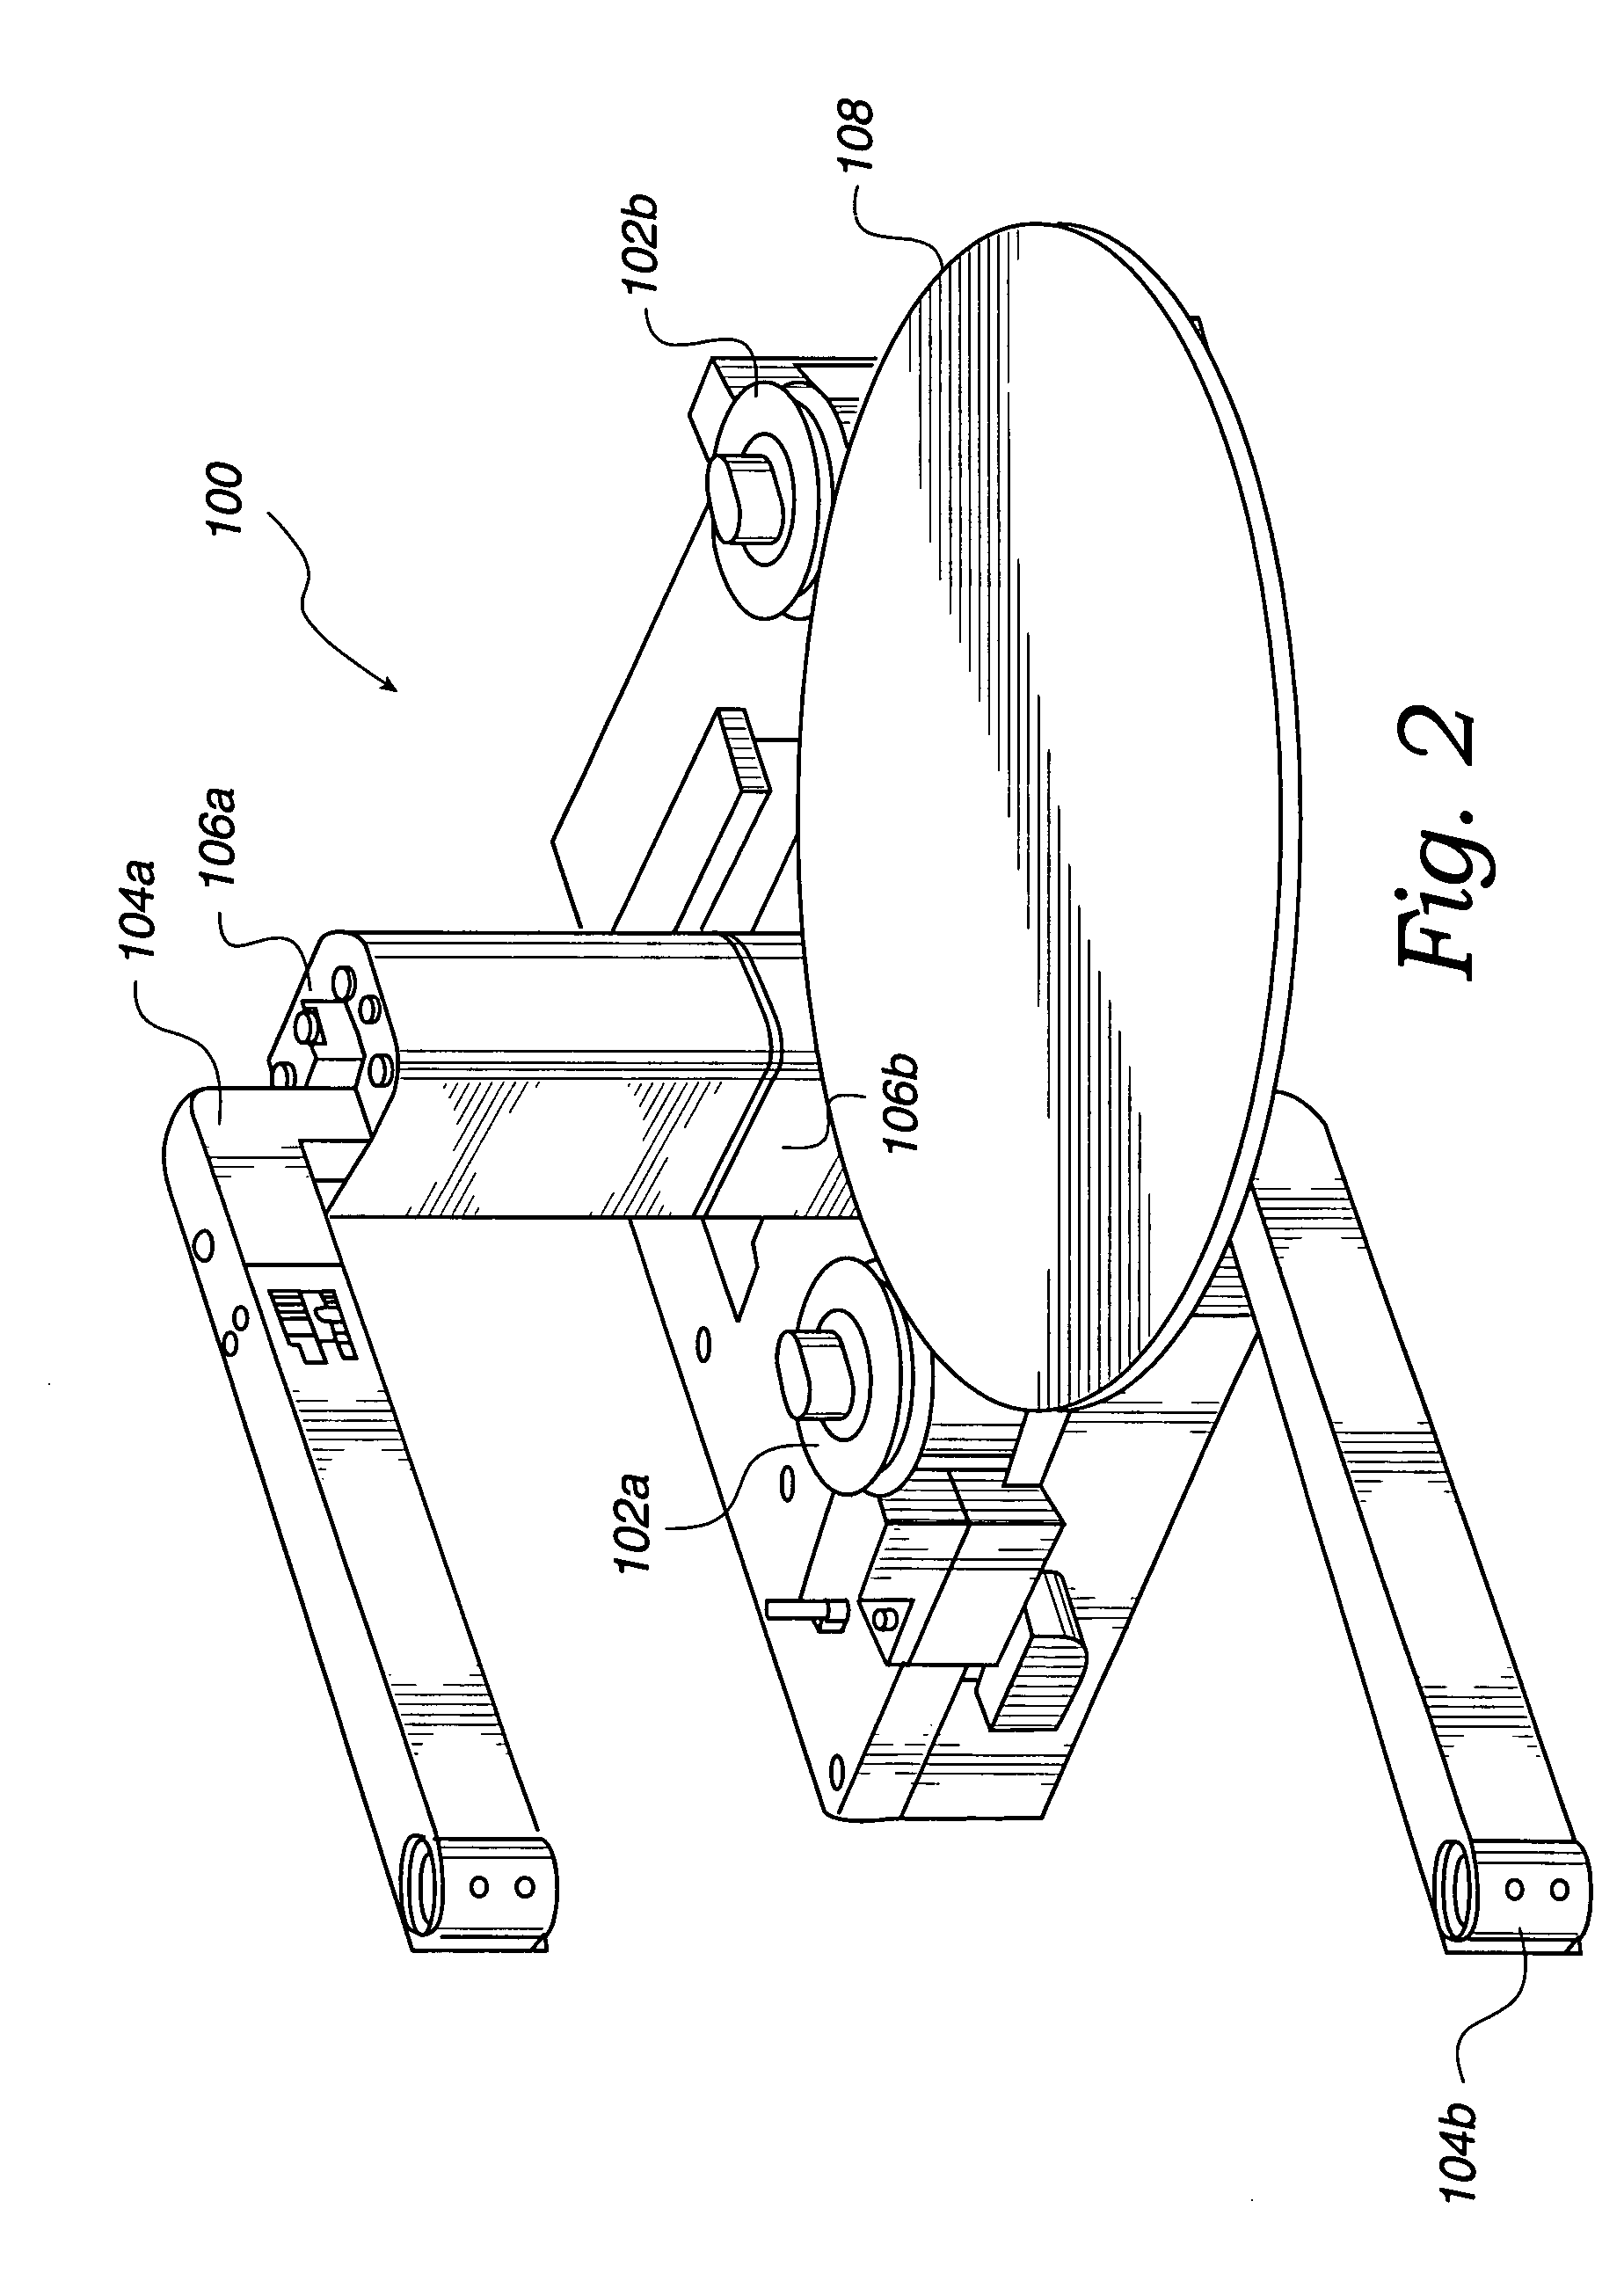 Apparatus and method for utilizing a meniscus in substrate processing